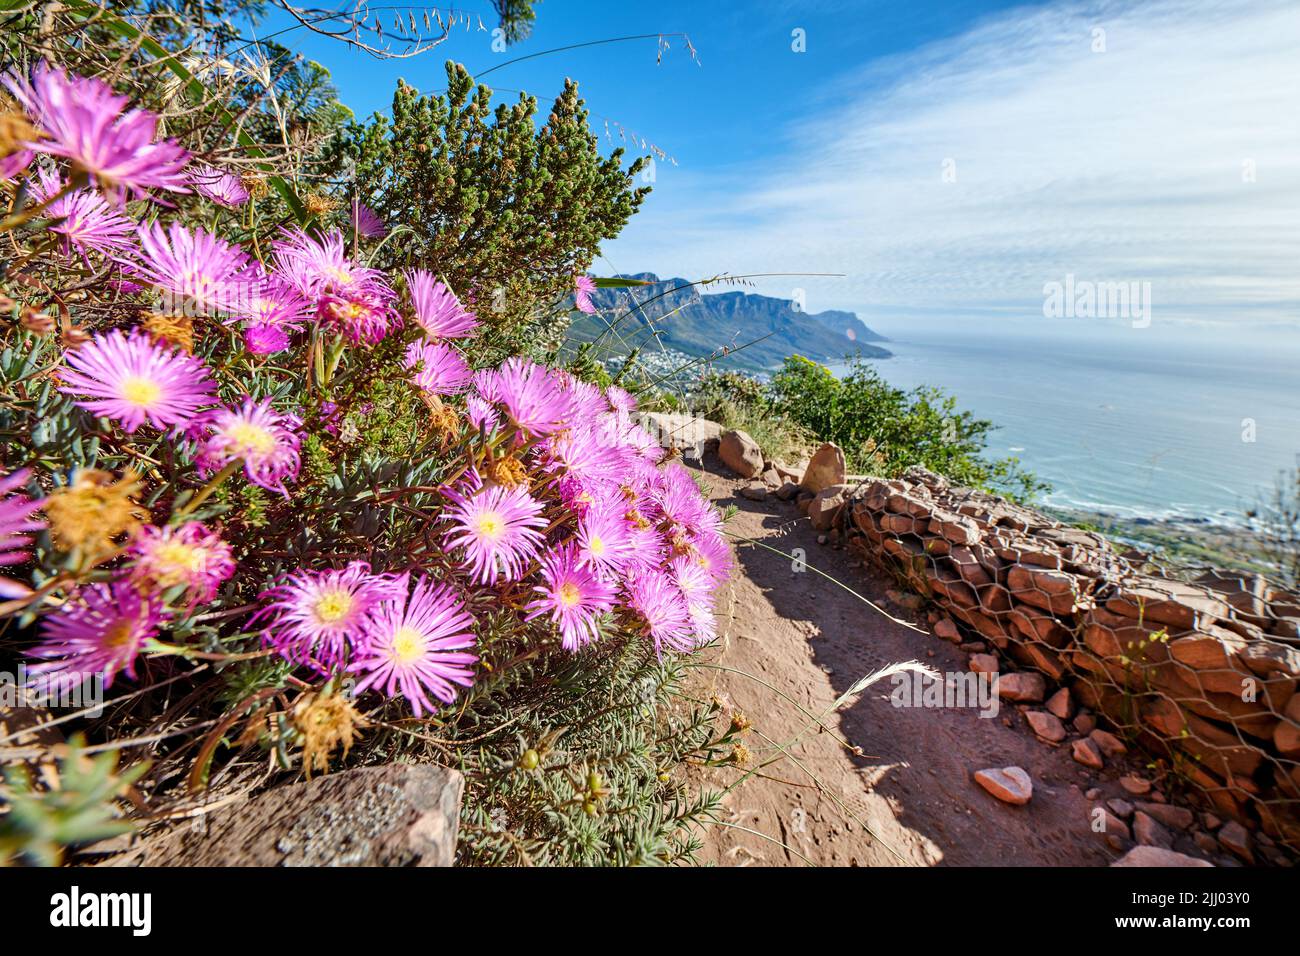 Pink flowers growing on a mountain with rugged hiking trail and blue sky background by the sea. Colorful flora in the carpobrotus edulis or ice plant Stock Photo